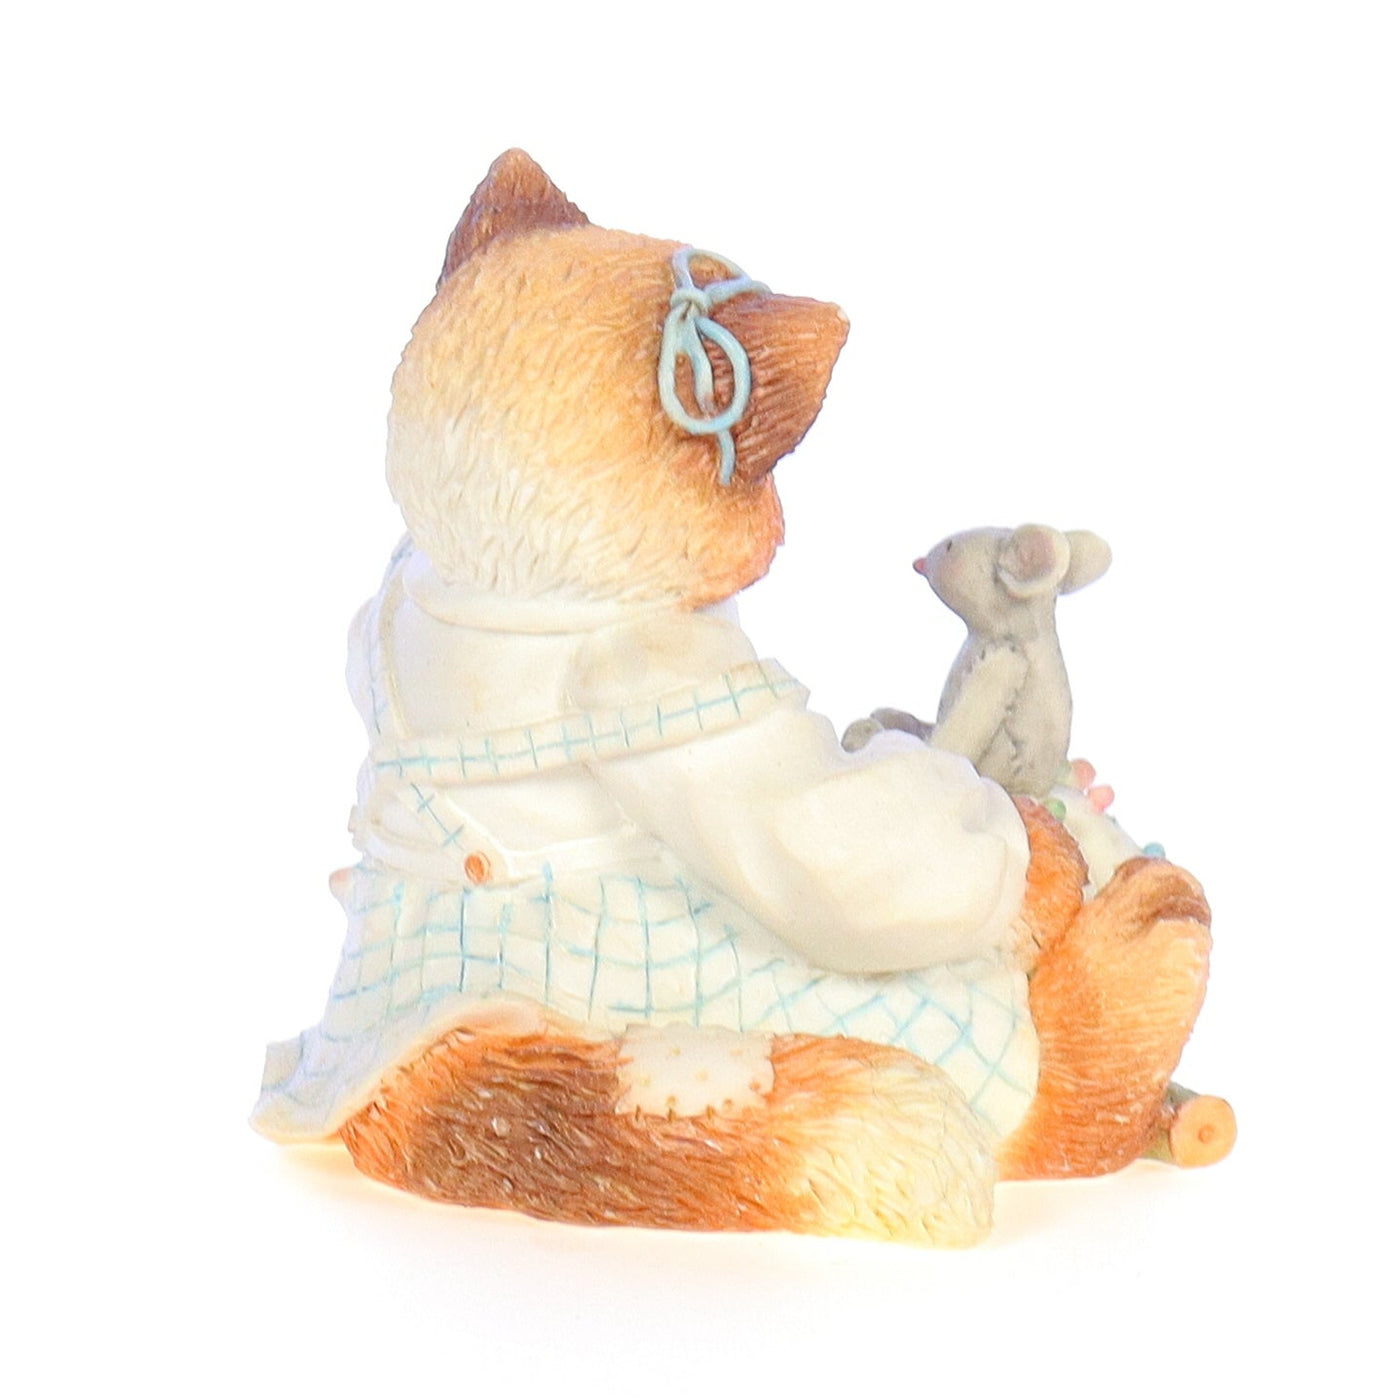 Calico_Kittens_Your_Patchwork_Charm_Shows_Through_Figurine_1994